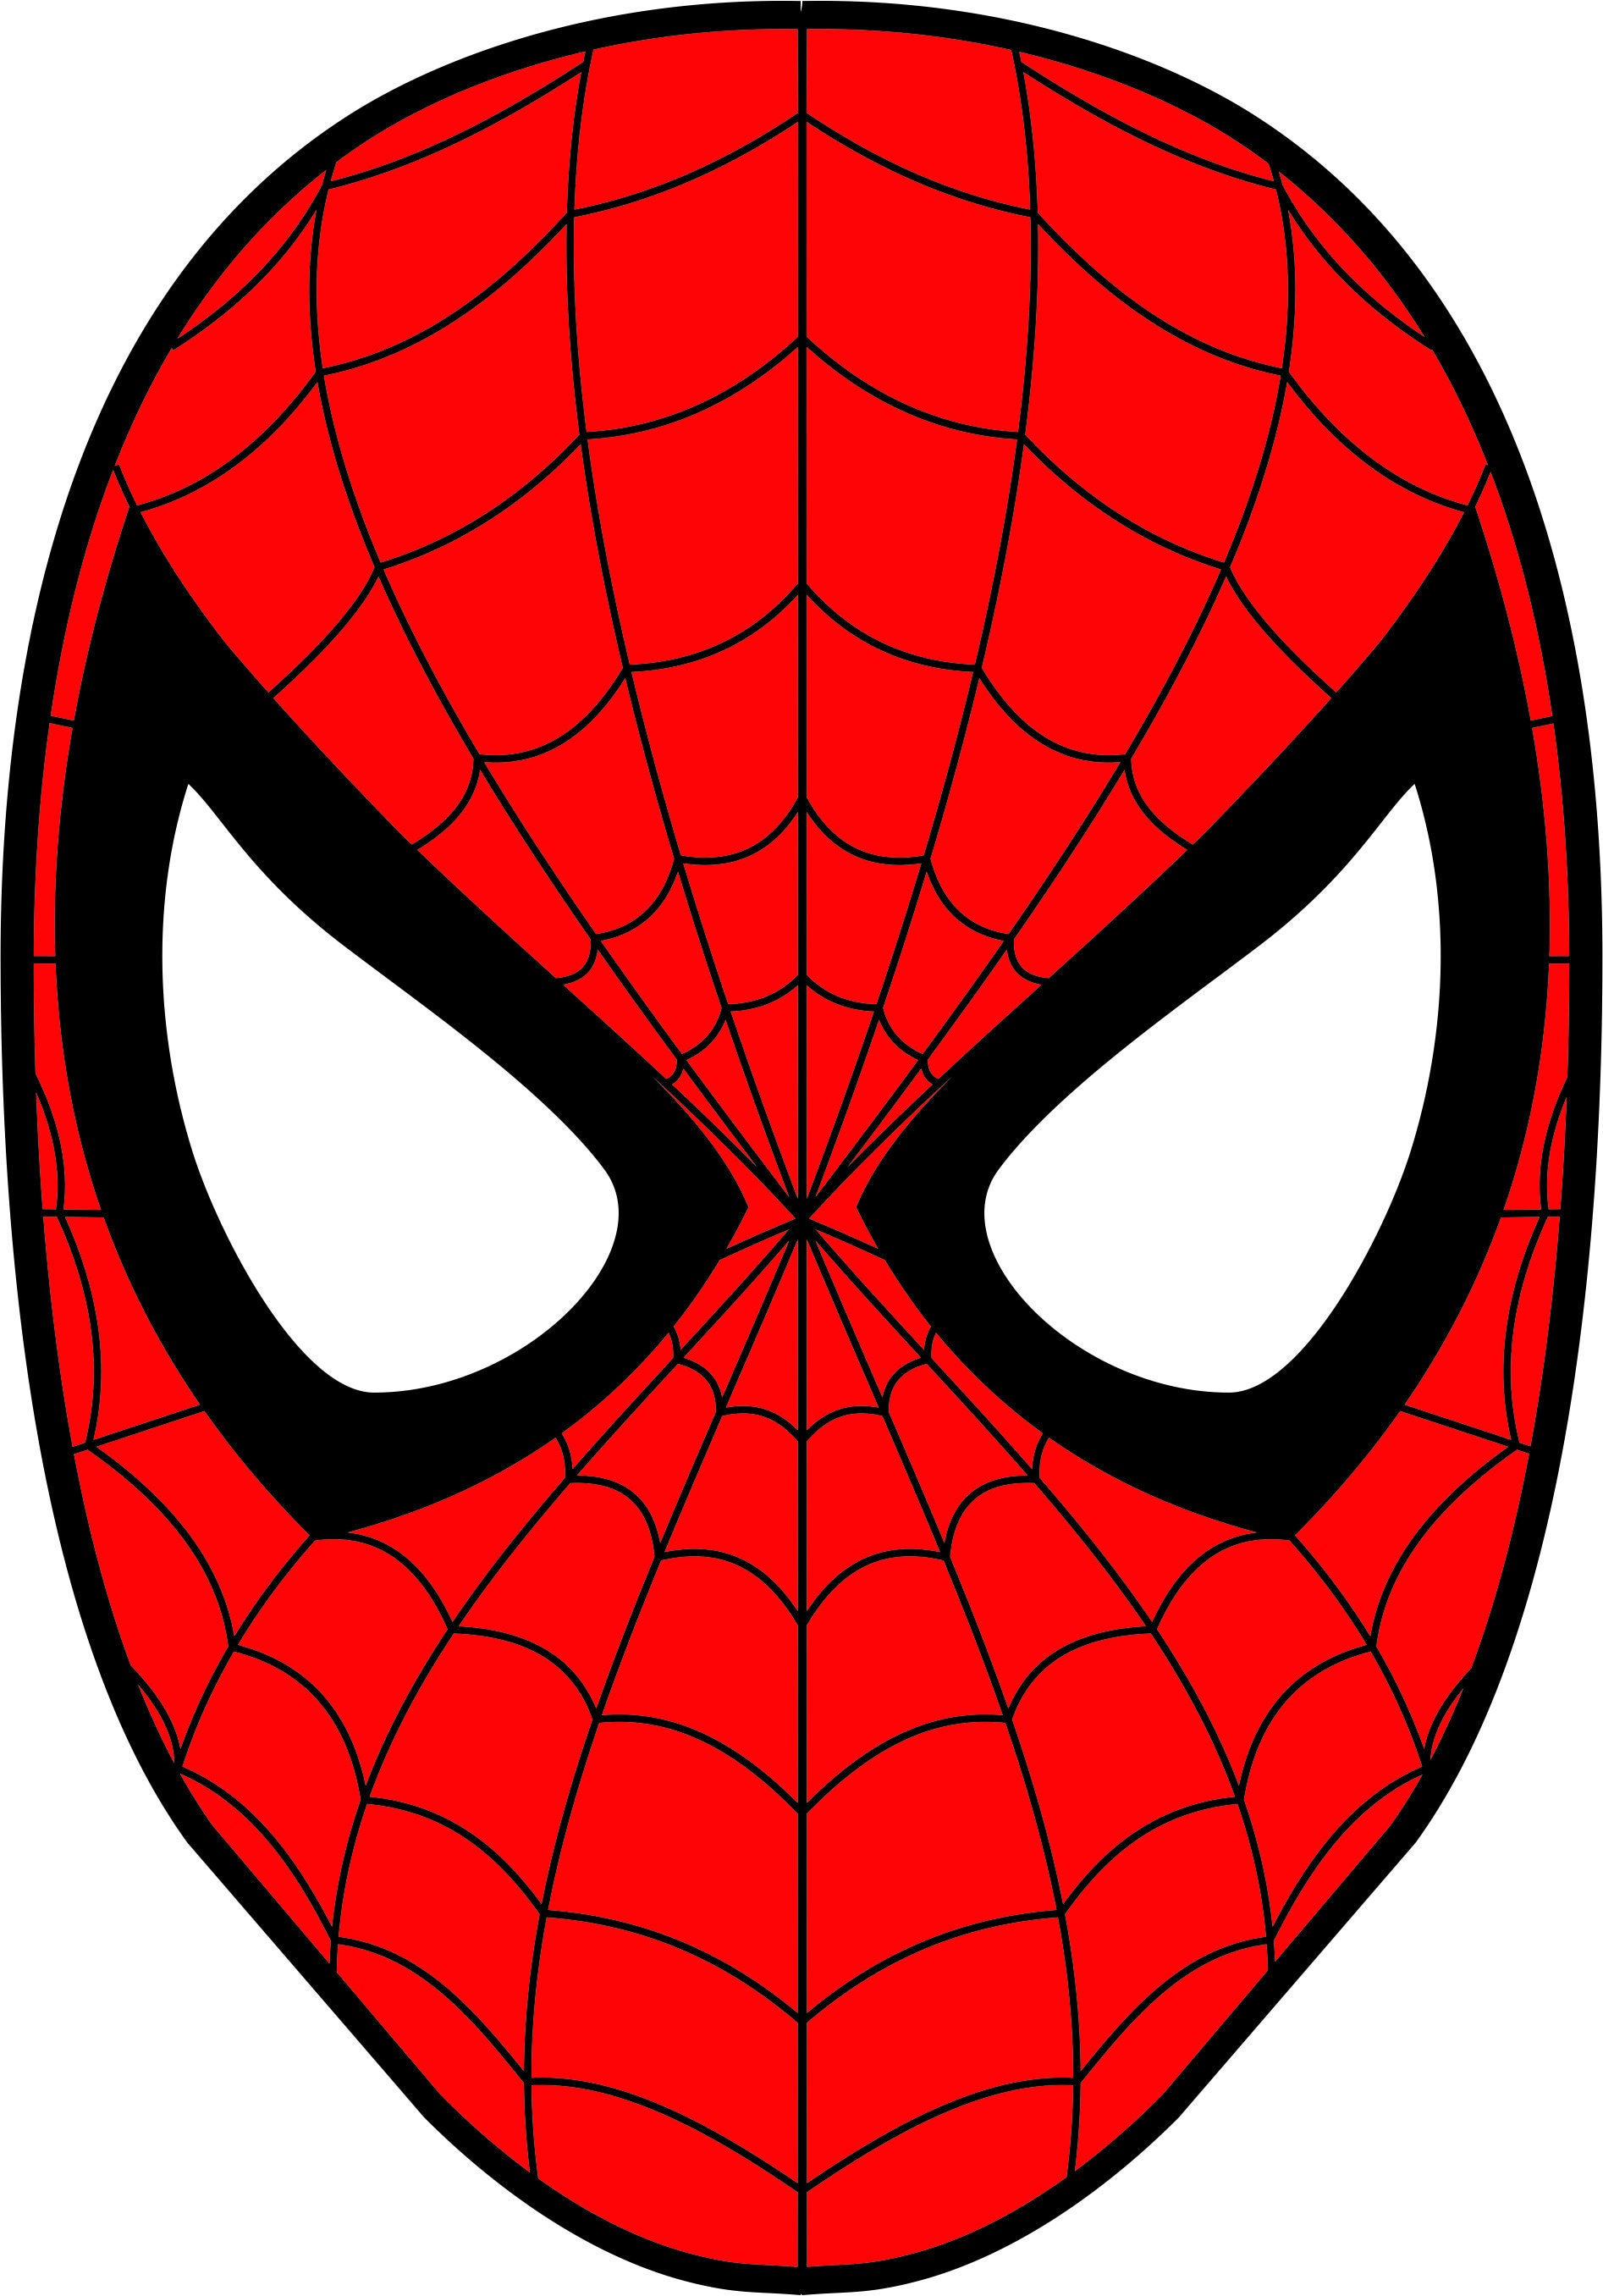 Download Spiderman Mask Superhero SVG DXF Logo Scalable Silhouette